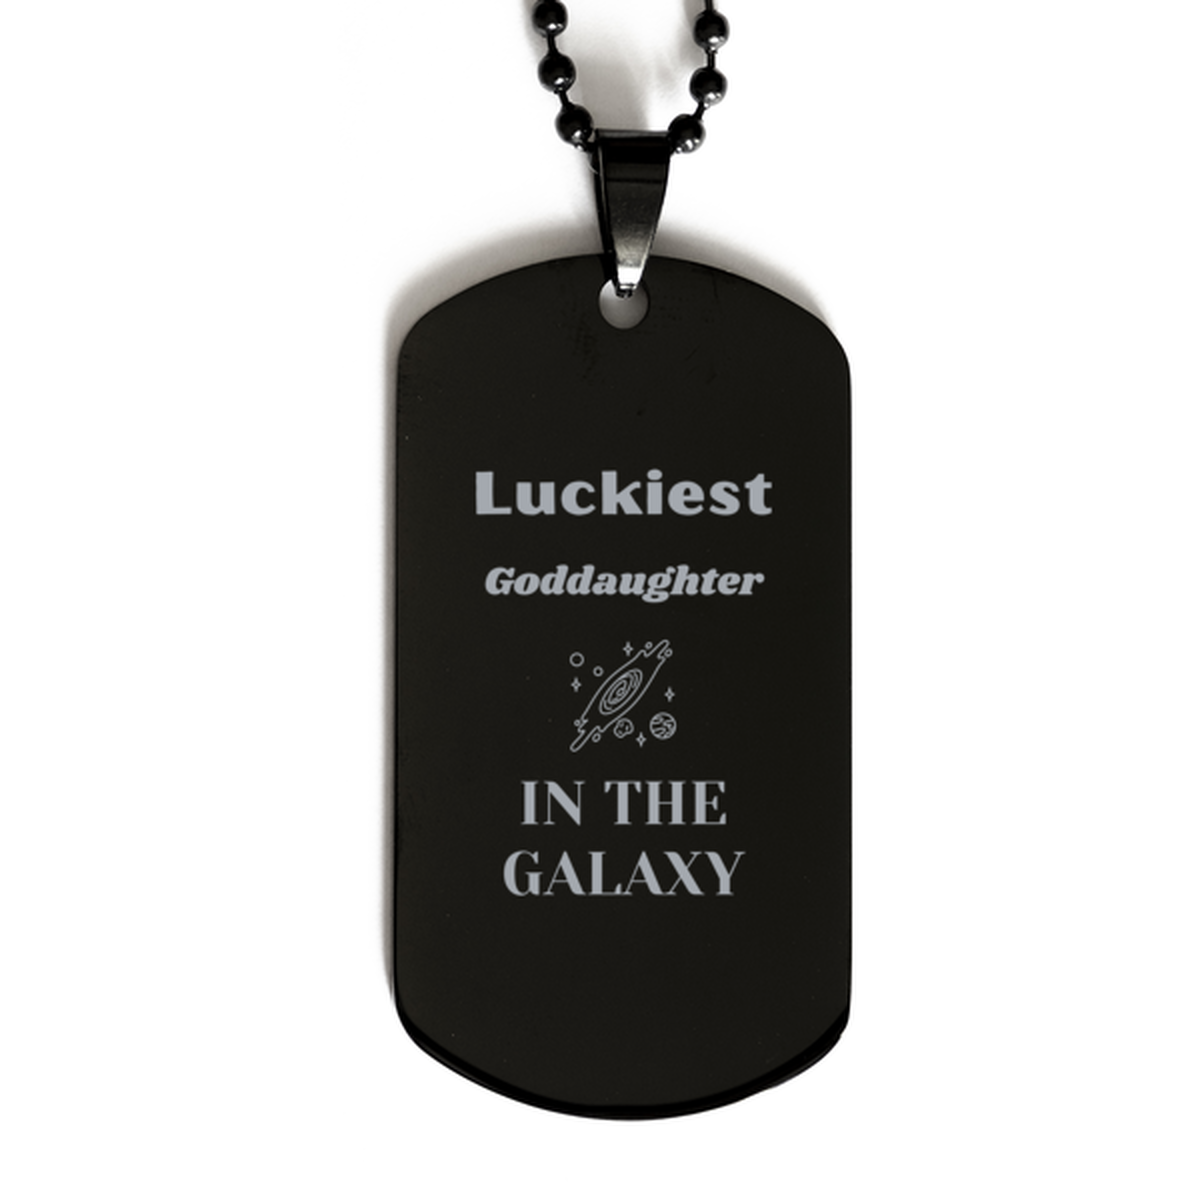 Luckiest Goddaughter in the Galaxy, To My Goddaughter Engraved Gifts, Christmas Goddaughter Black Dog Tag Gifts, X-mas Birthday Unique Gifts For Goddaughter Men Women